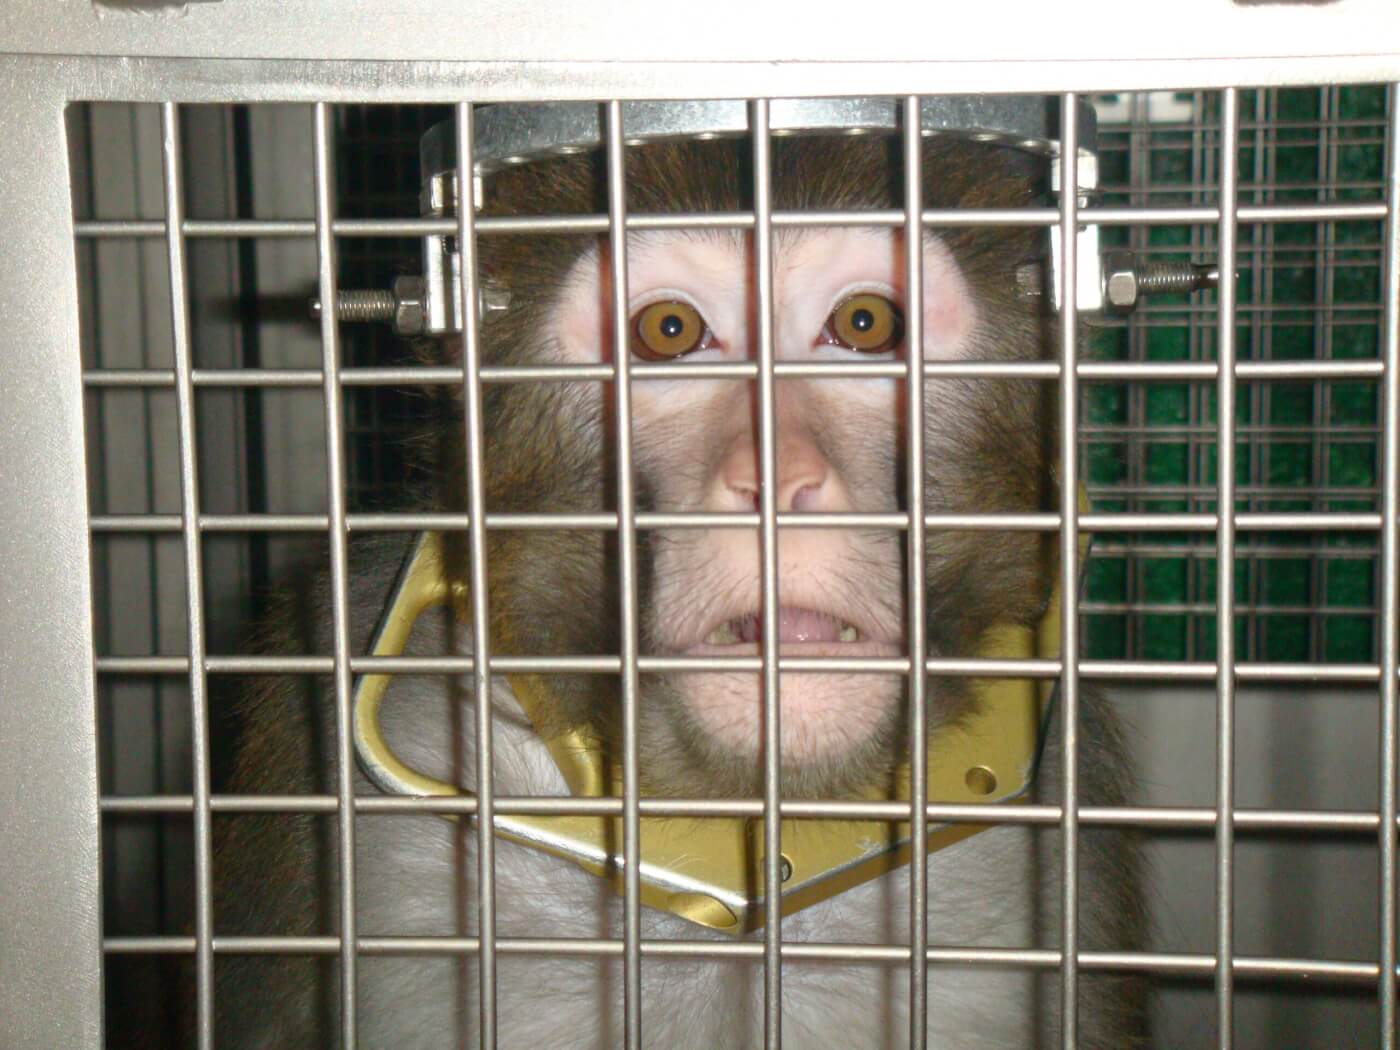 We Don't Need More Monkeys, We Need a New Strategy to Test Vaccines